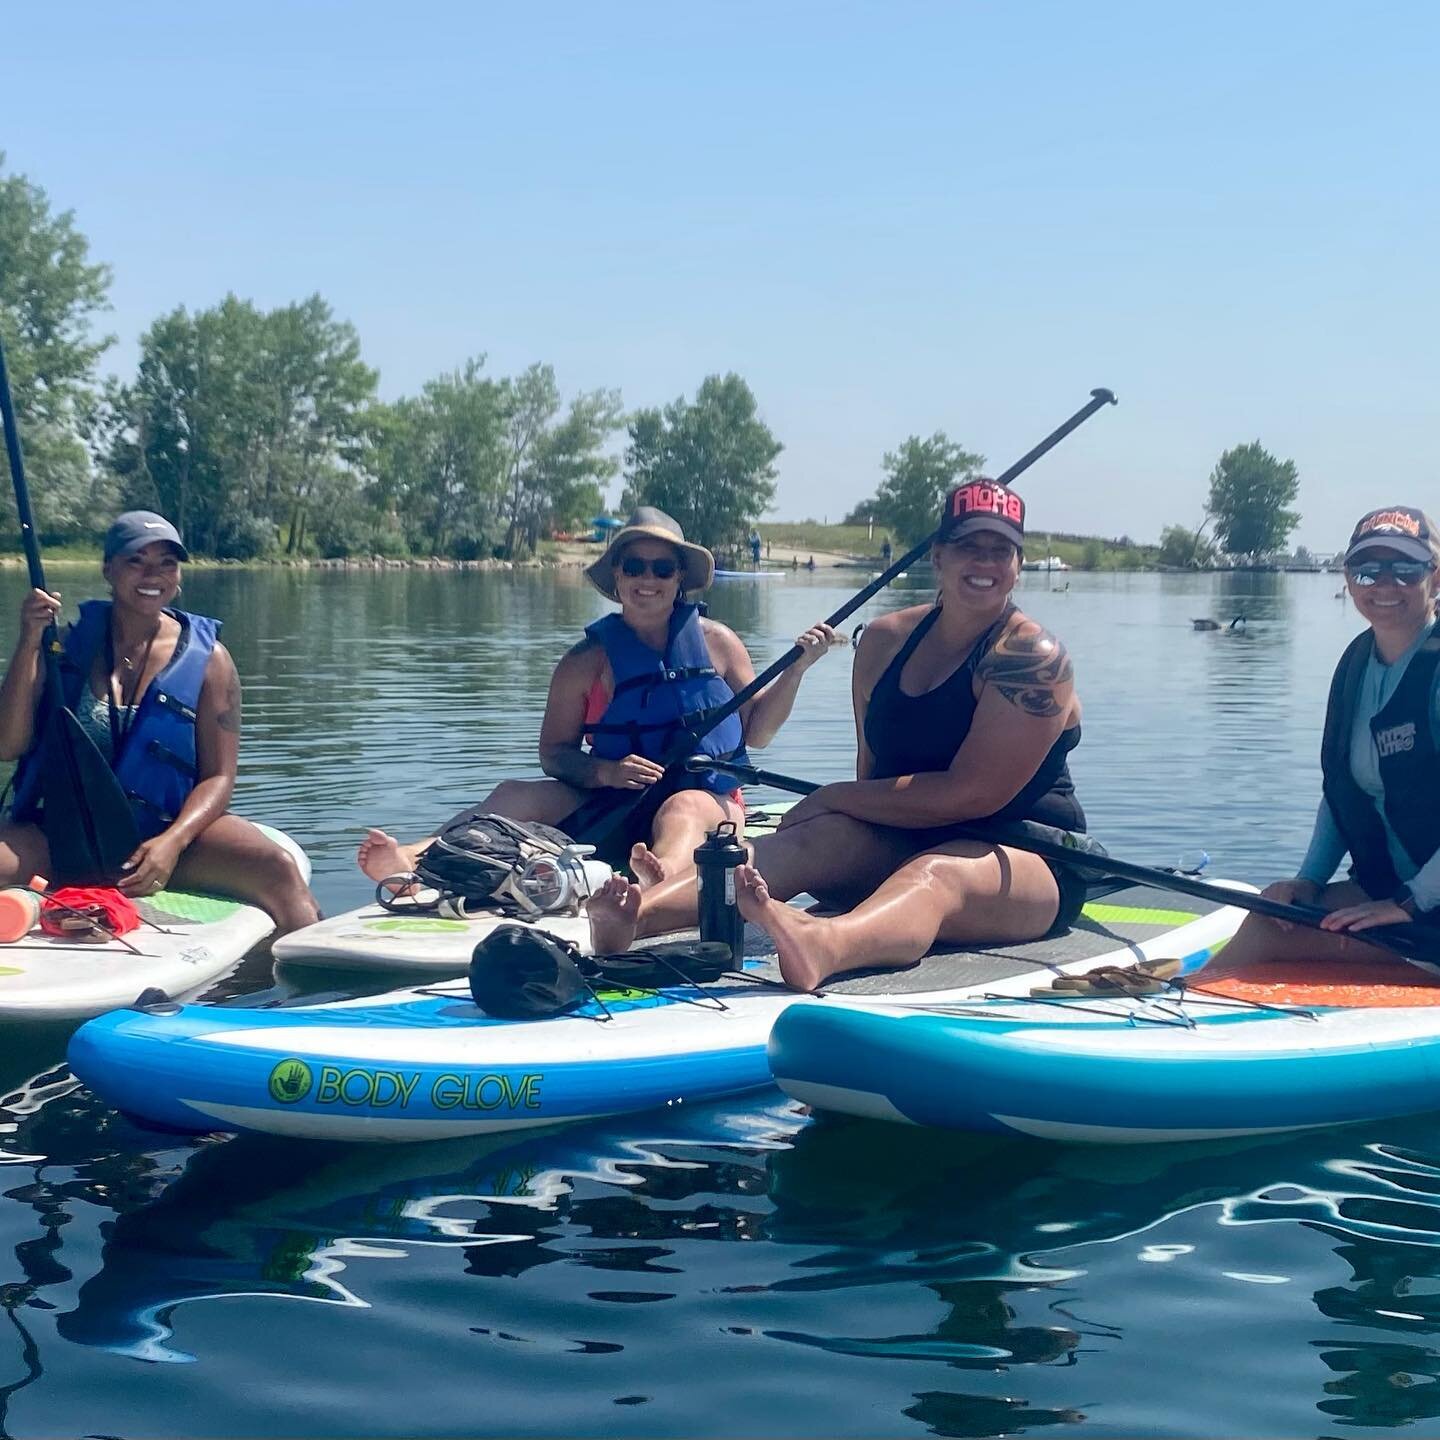 Another great day on the water with these beautiful fire wives. These ladies have so much they can relate to and build support systems for each other. @adamscountyfirerescue @arvada_fire  #revitalcolorado #outdoortherapy #connection #mentalwellness #